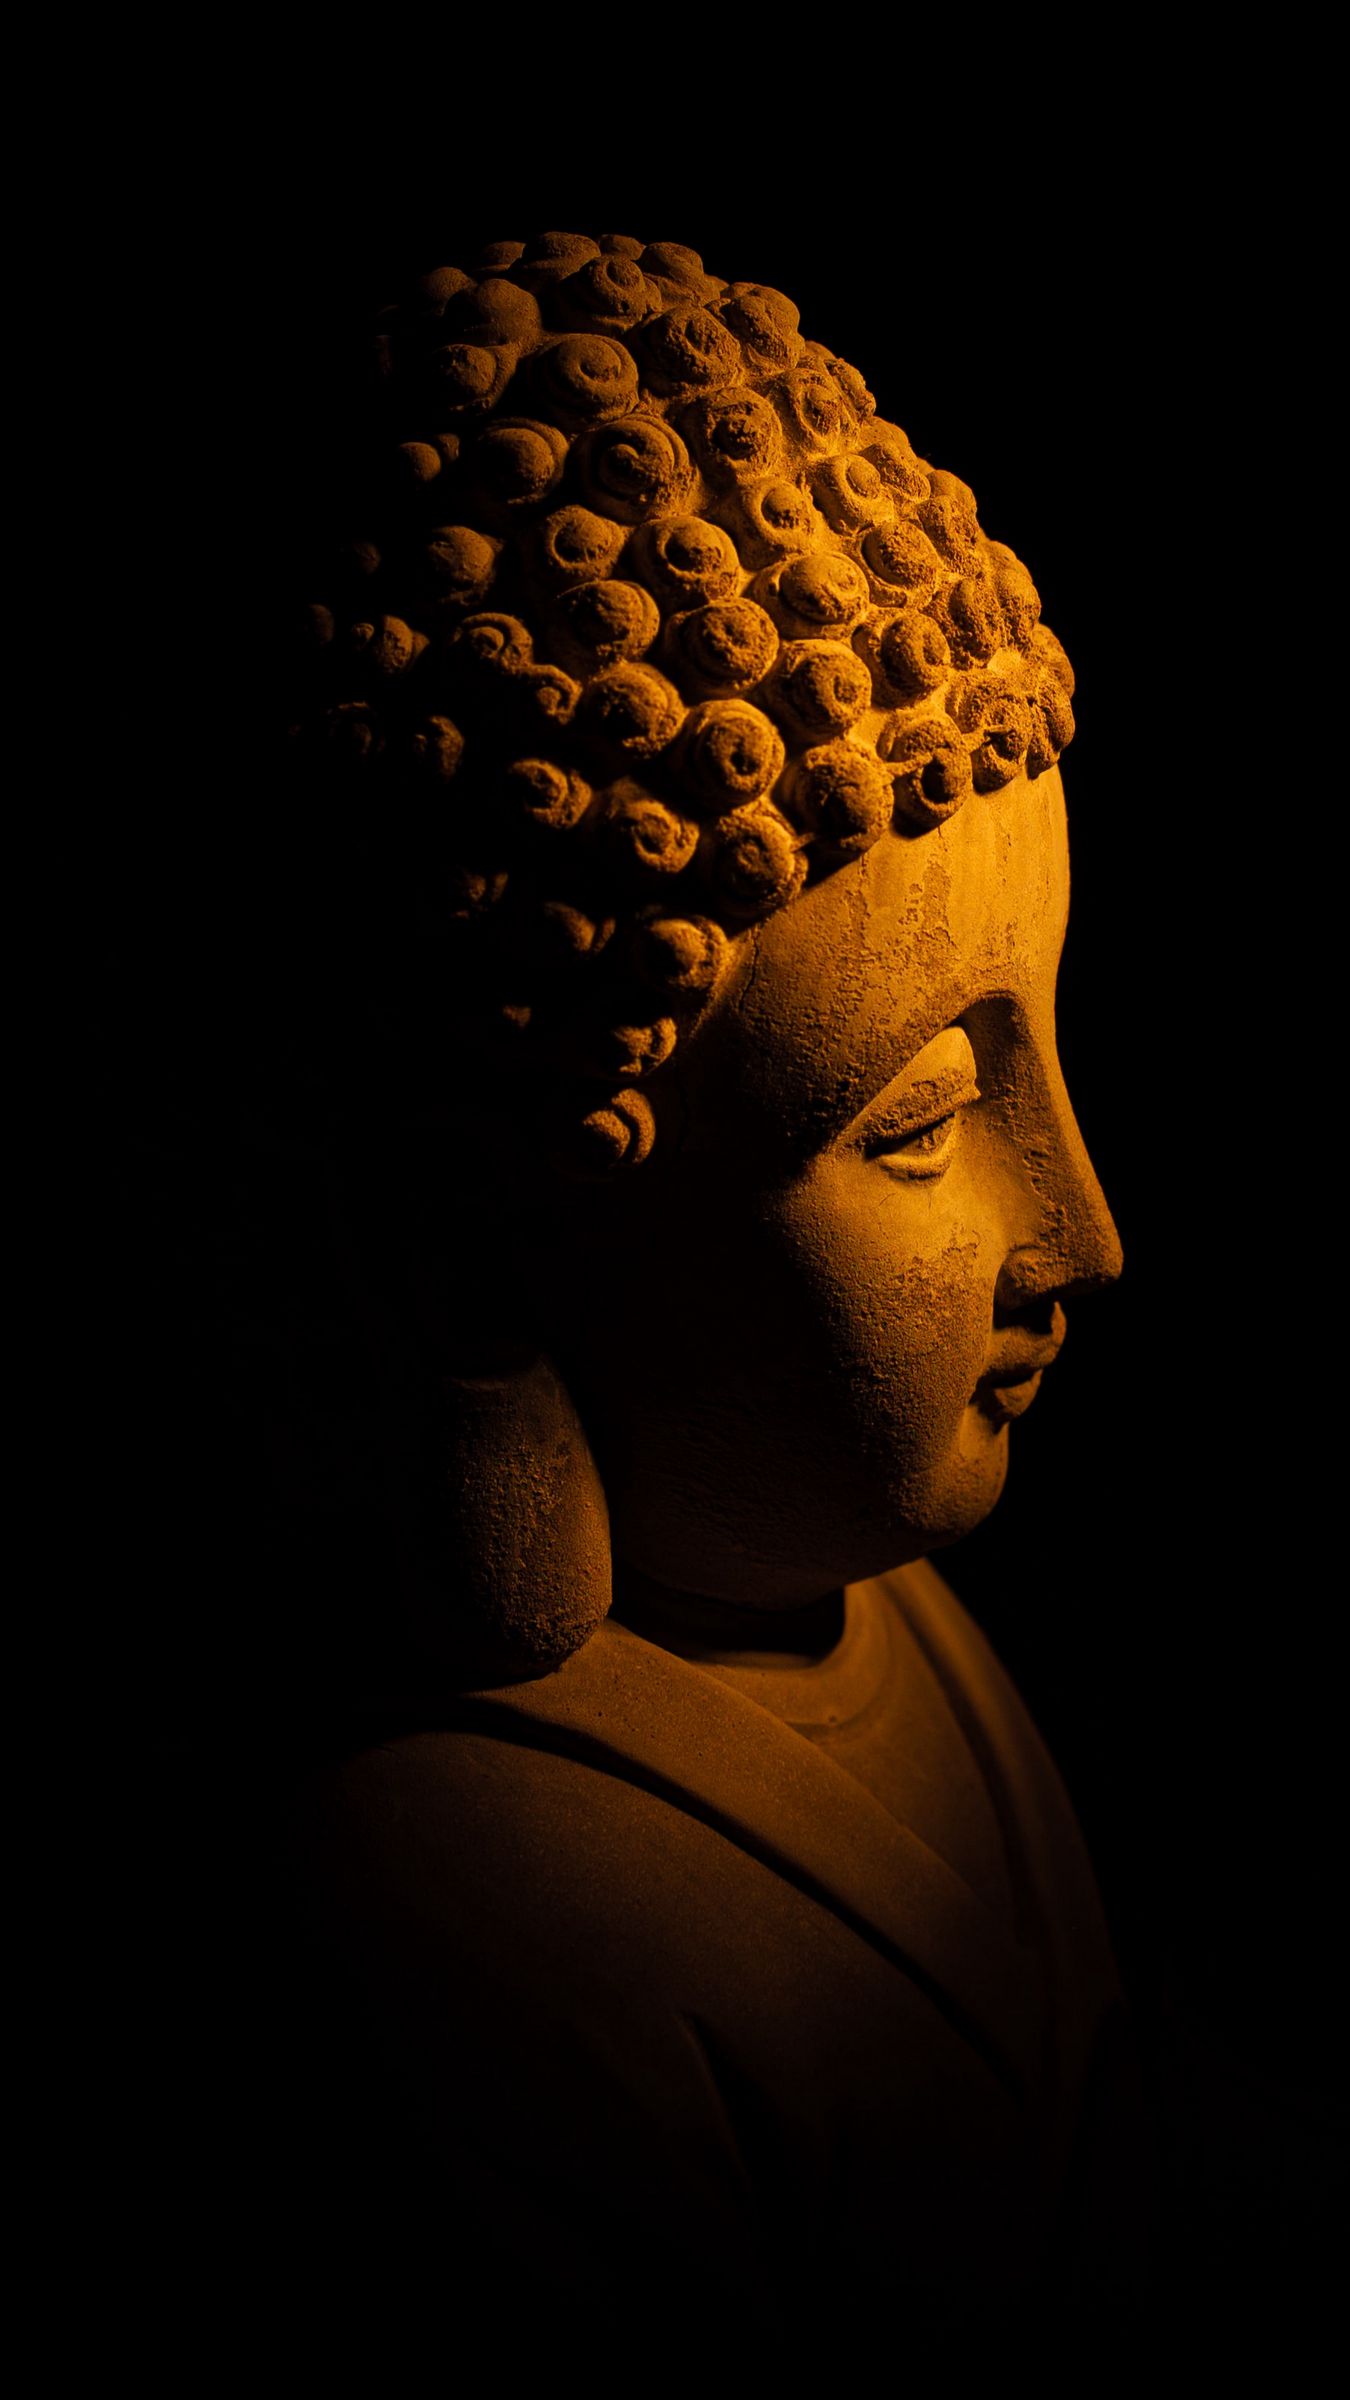 Buddha Phone Wallpaper - Mobile Abyss